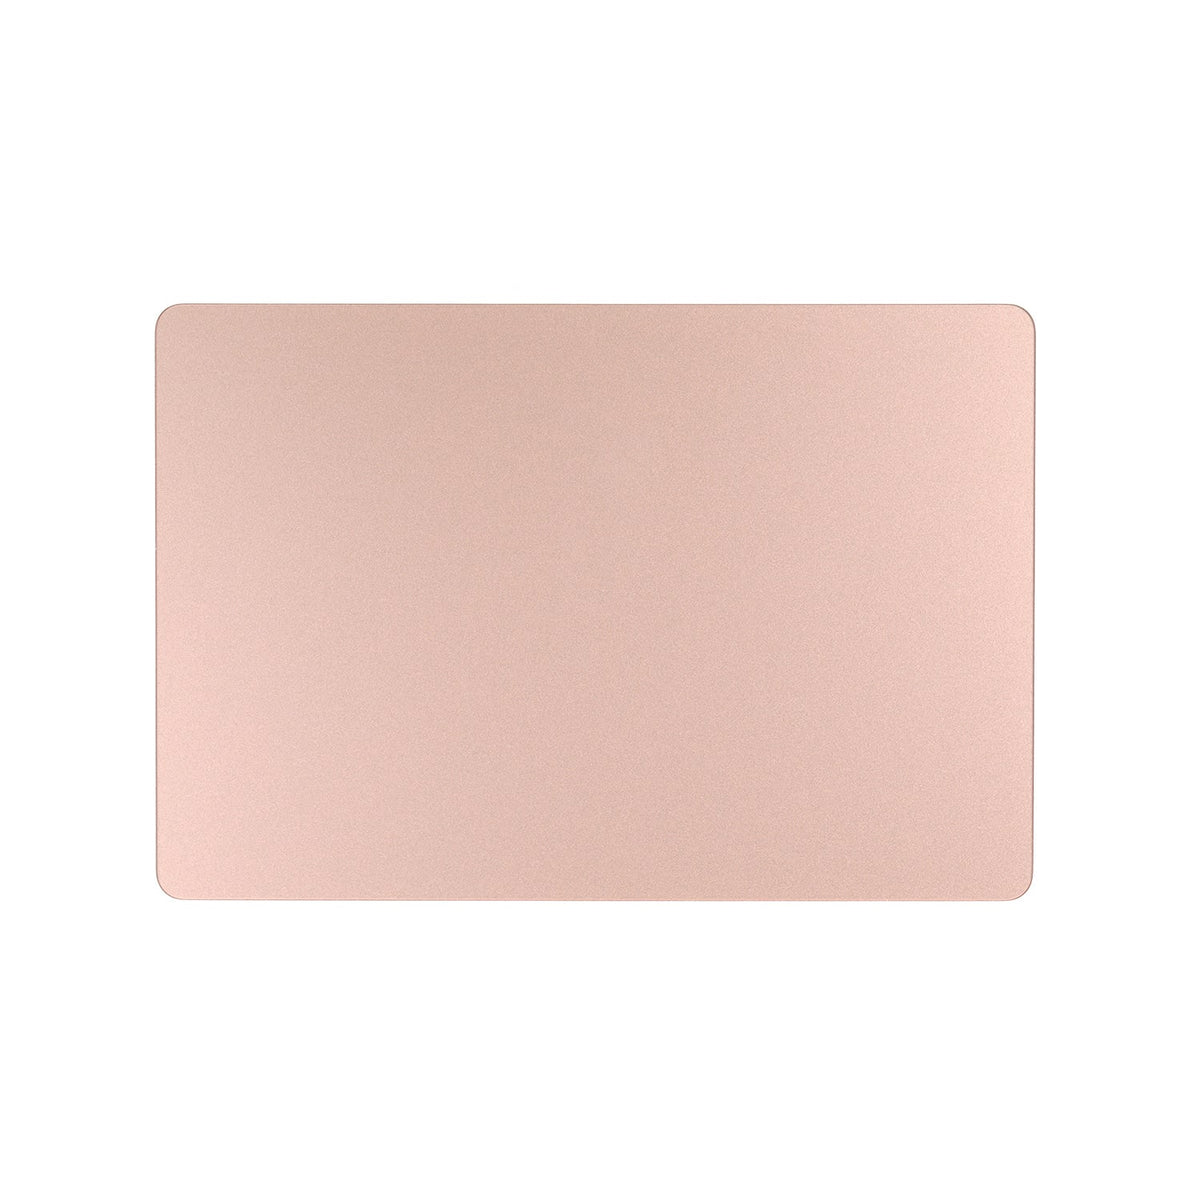 GOLD TRACKPAD FOR MACBOOK AIR 13" RETINA A1932 (LATE 2018, MID 2019)